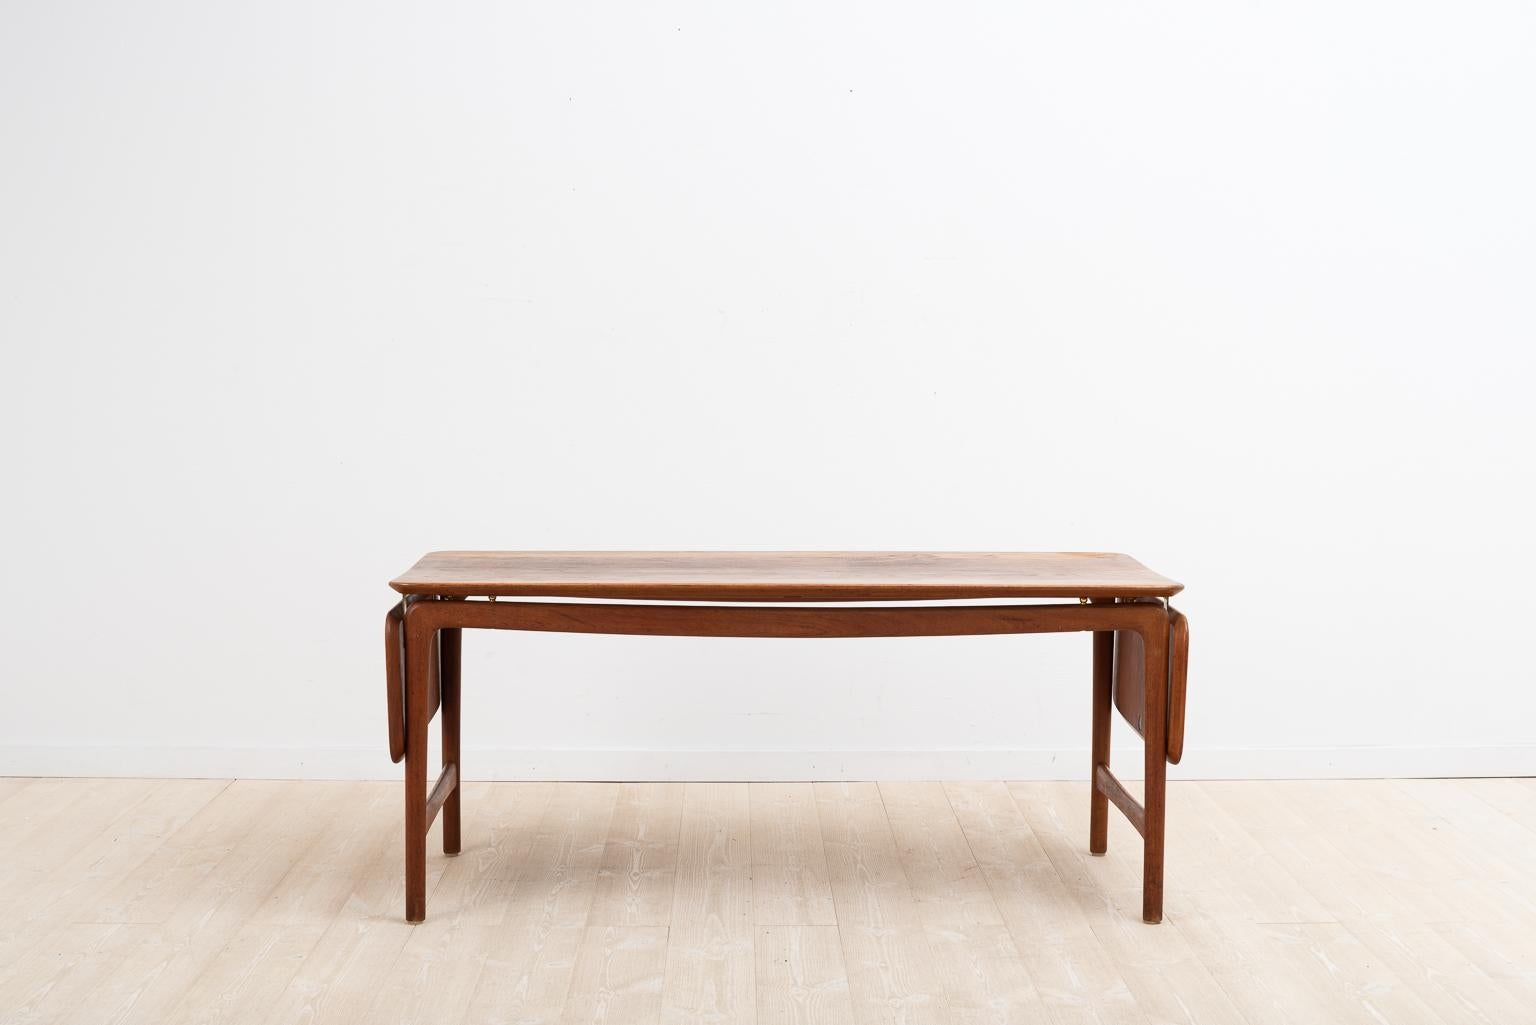 Teak coffee table designed by Peter Hvidt & Orla Mølgaard Nielsen for France & Daverkosen. The table is manufactured from solid teak. The middle part is 128 cm and the side panels ca 25 cm each.

The table top has some minor scraped and a small